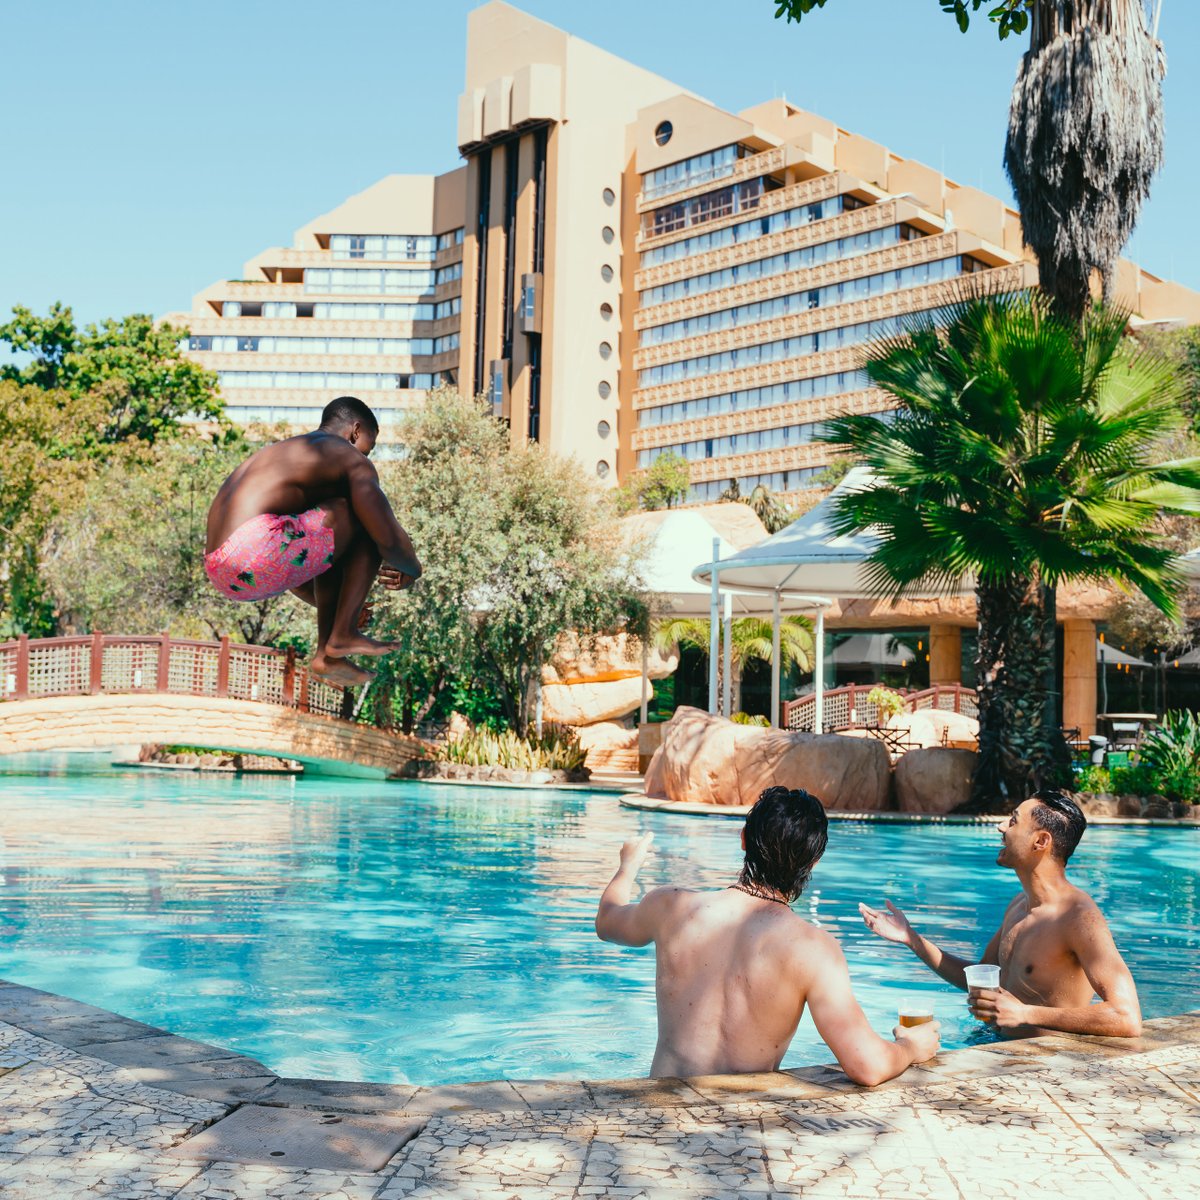 This could be you and your crew at @SunCityResortSA🔥 Tag them and get planning! ow.ly/tA9I50Mt82l